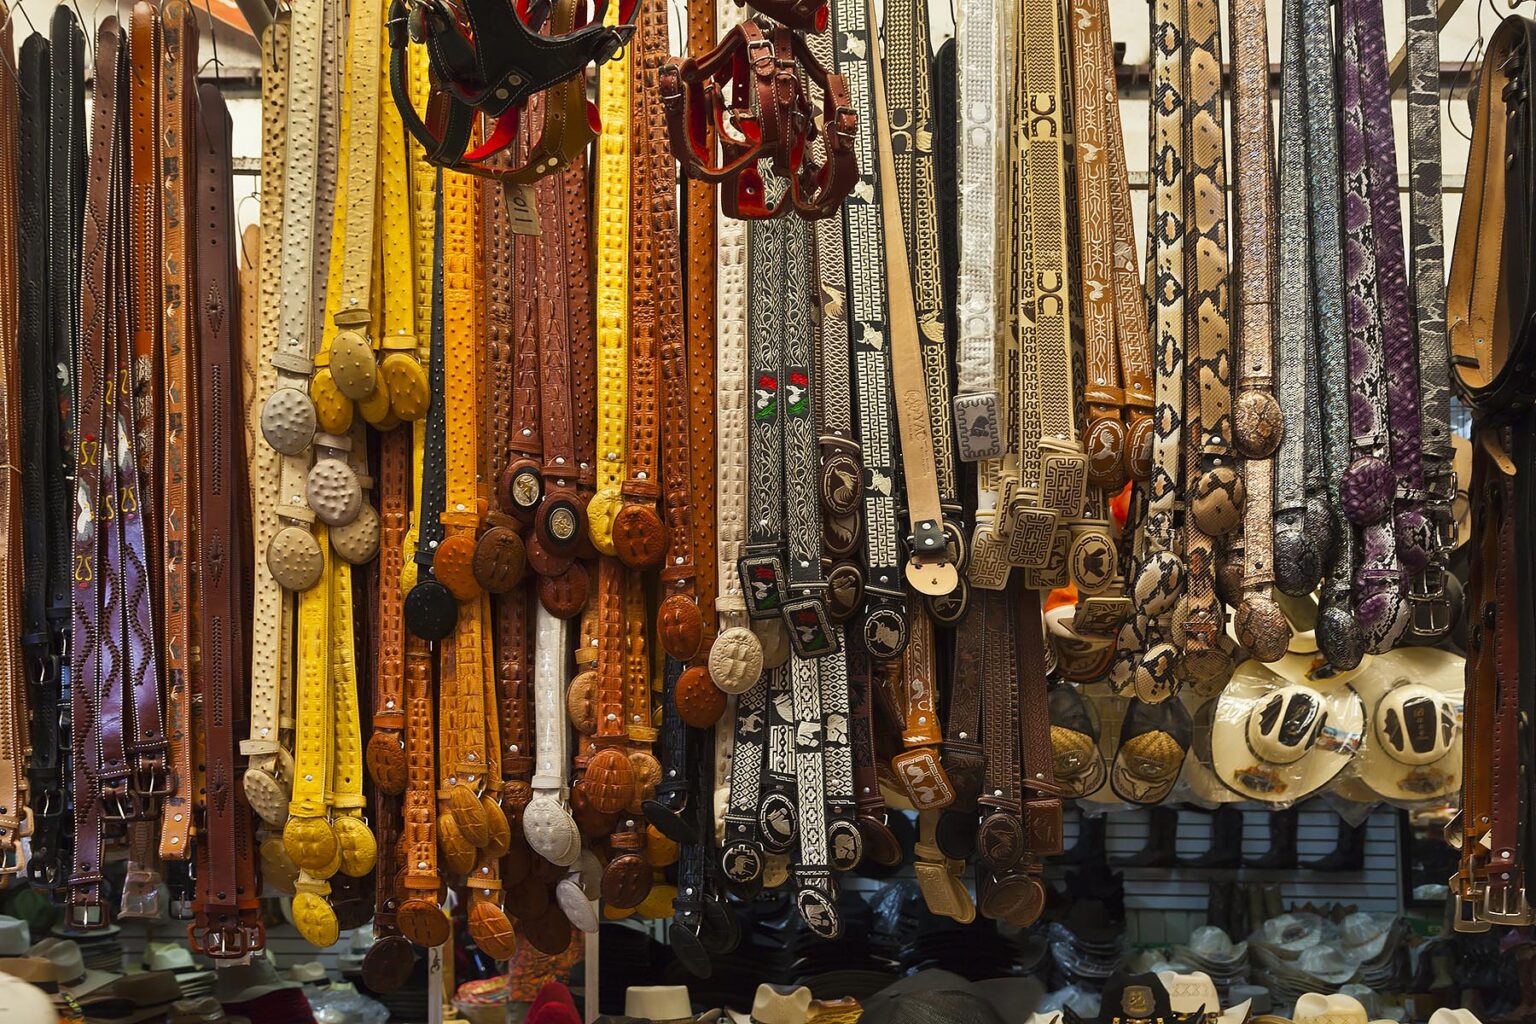 BELTS made from animal skins and for sale in the massive MERCADO DE ABASTO - OAXACA, MEXICO